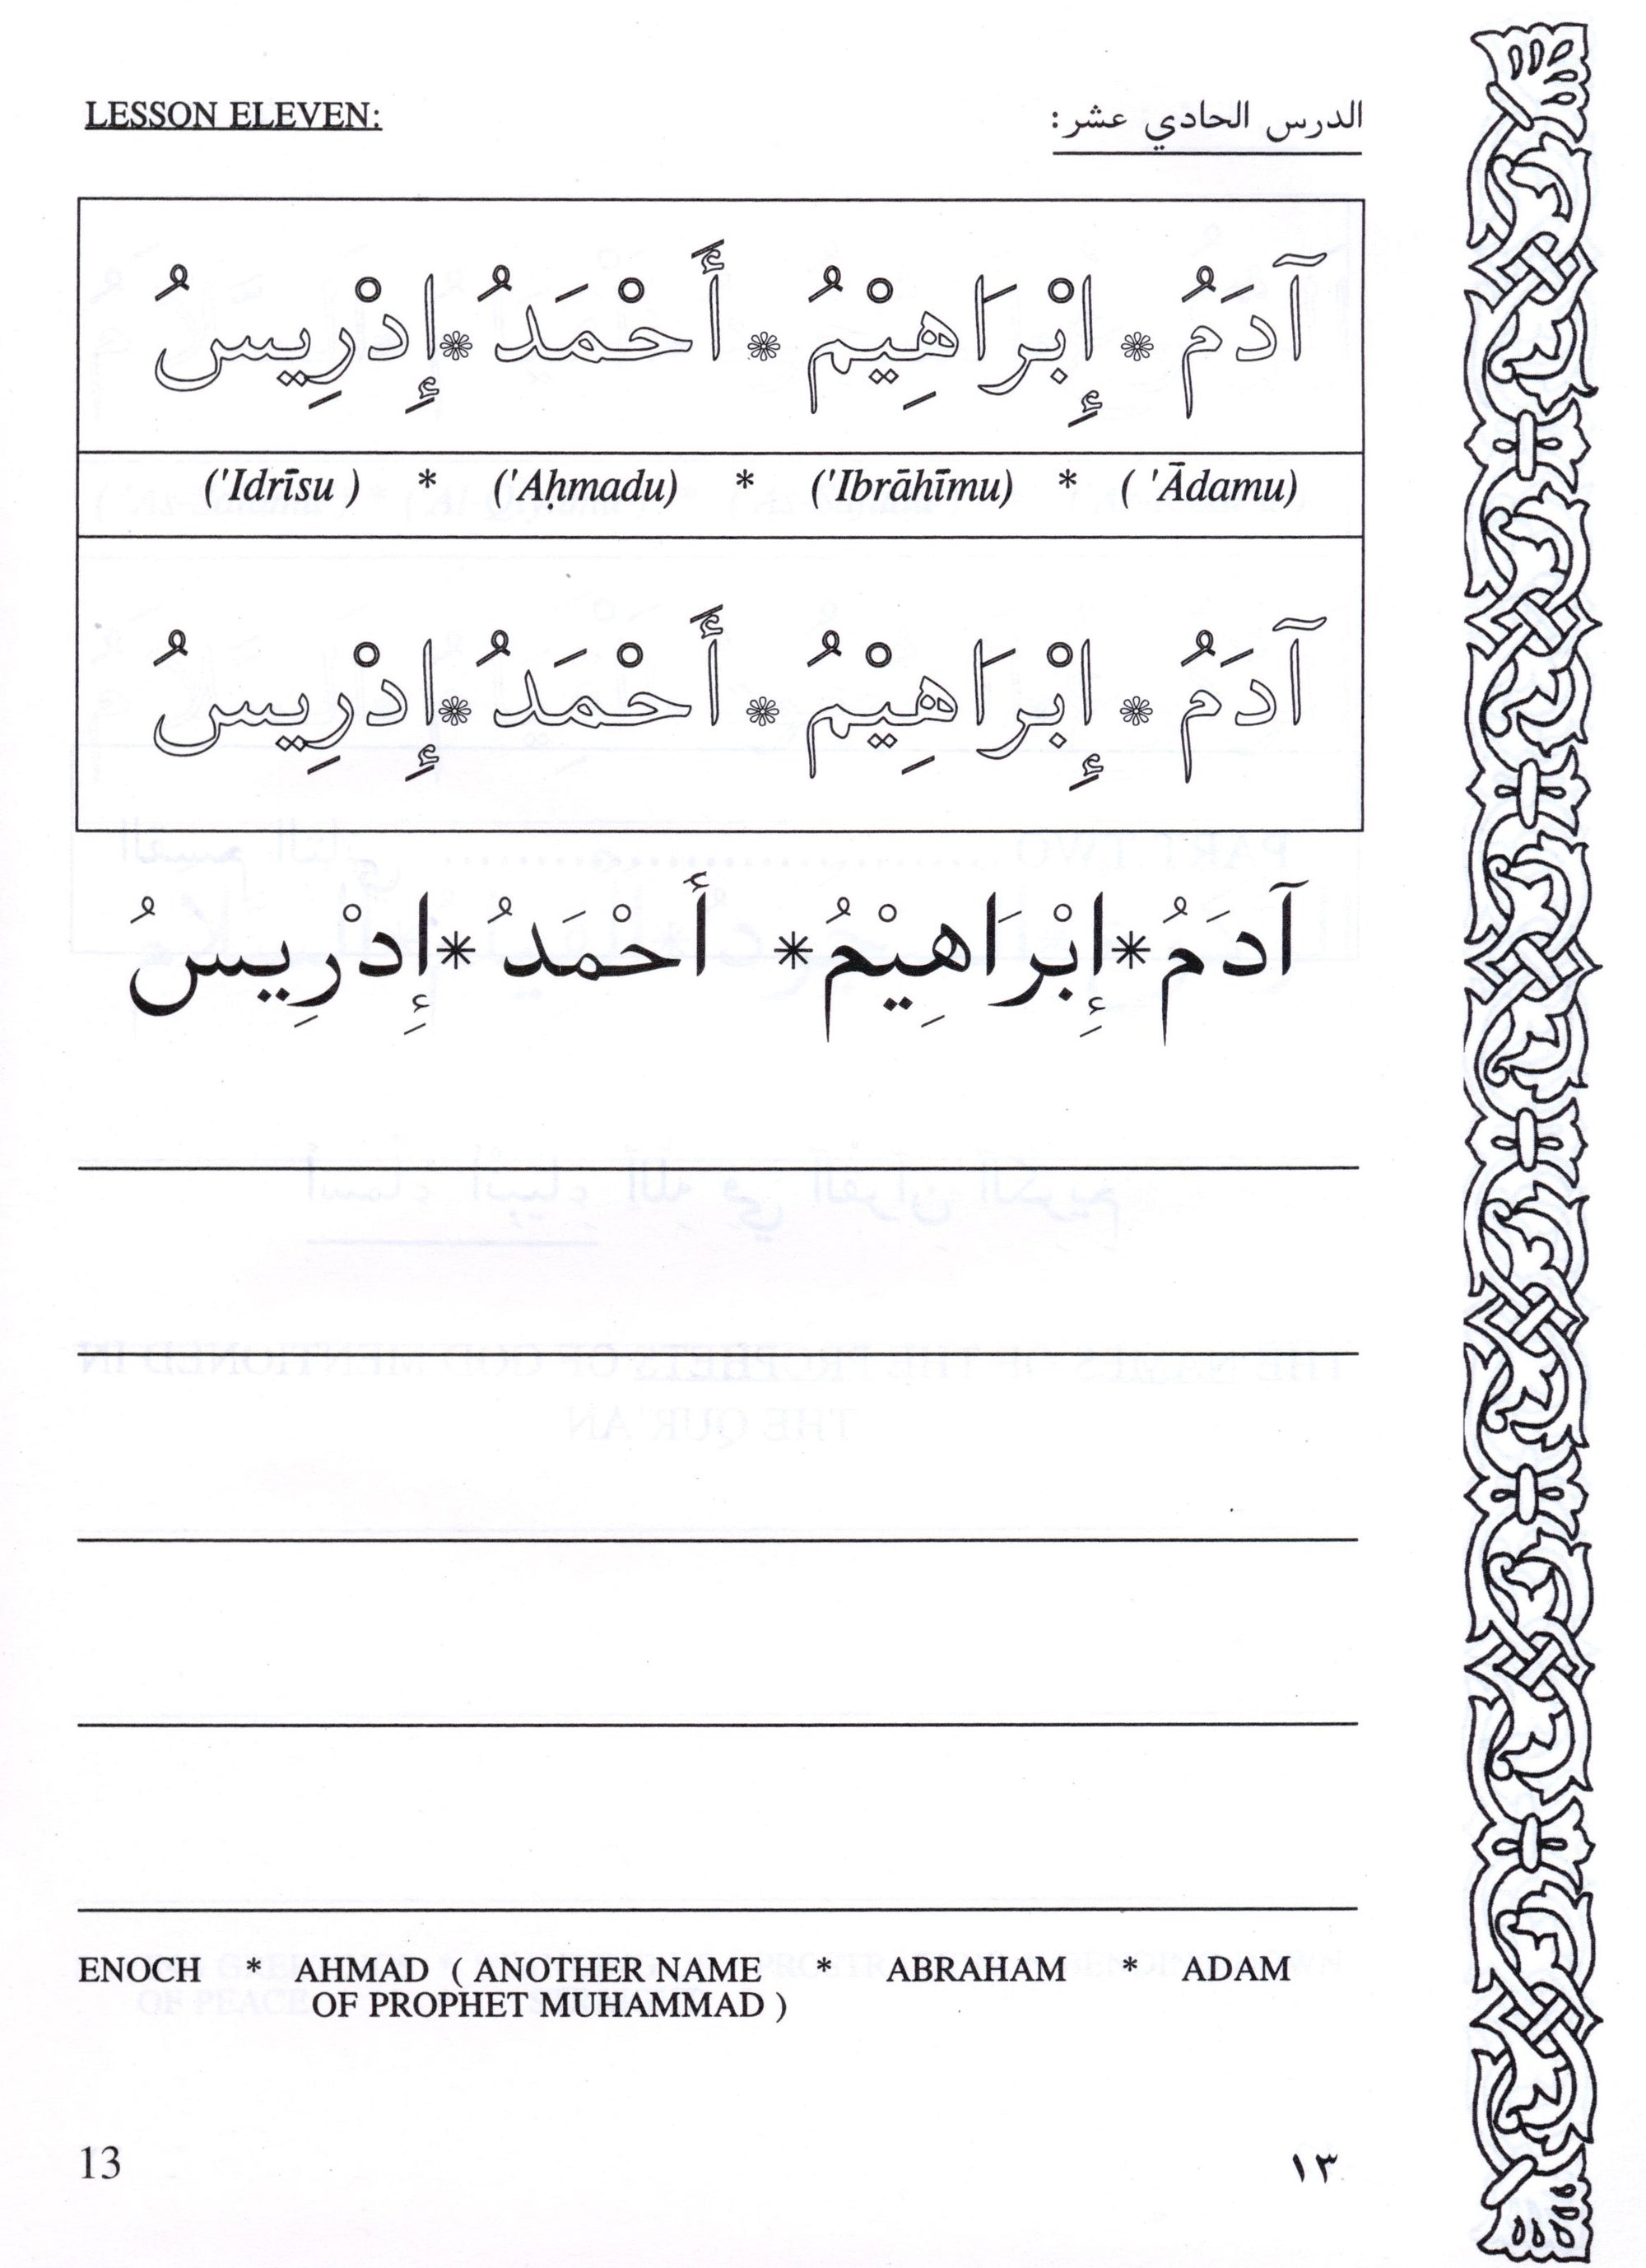 Let's Read & Write Arabic (Book Two)